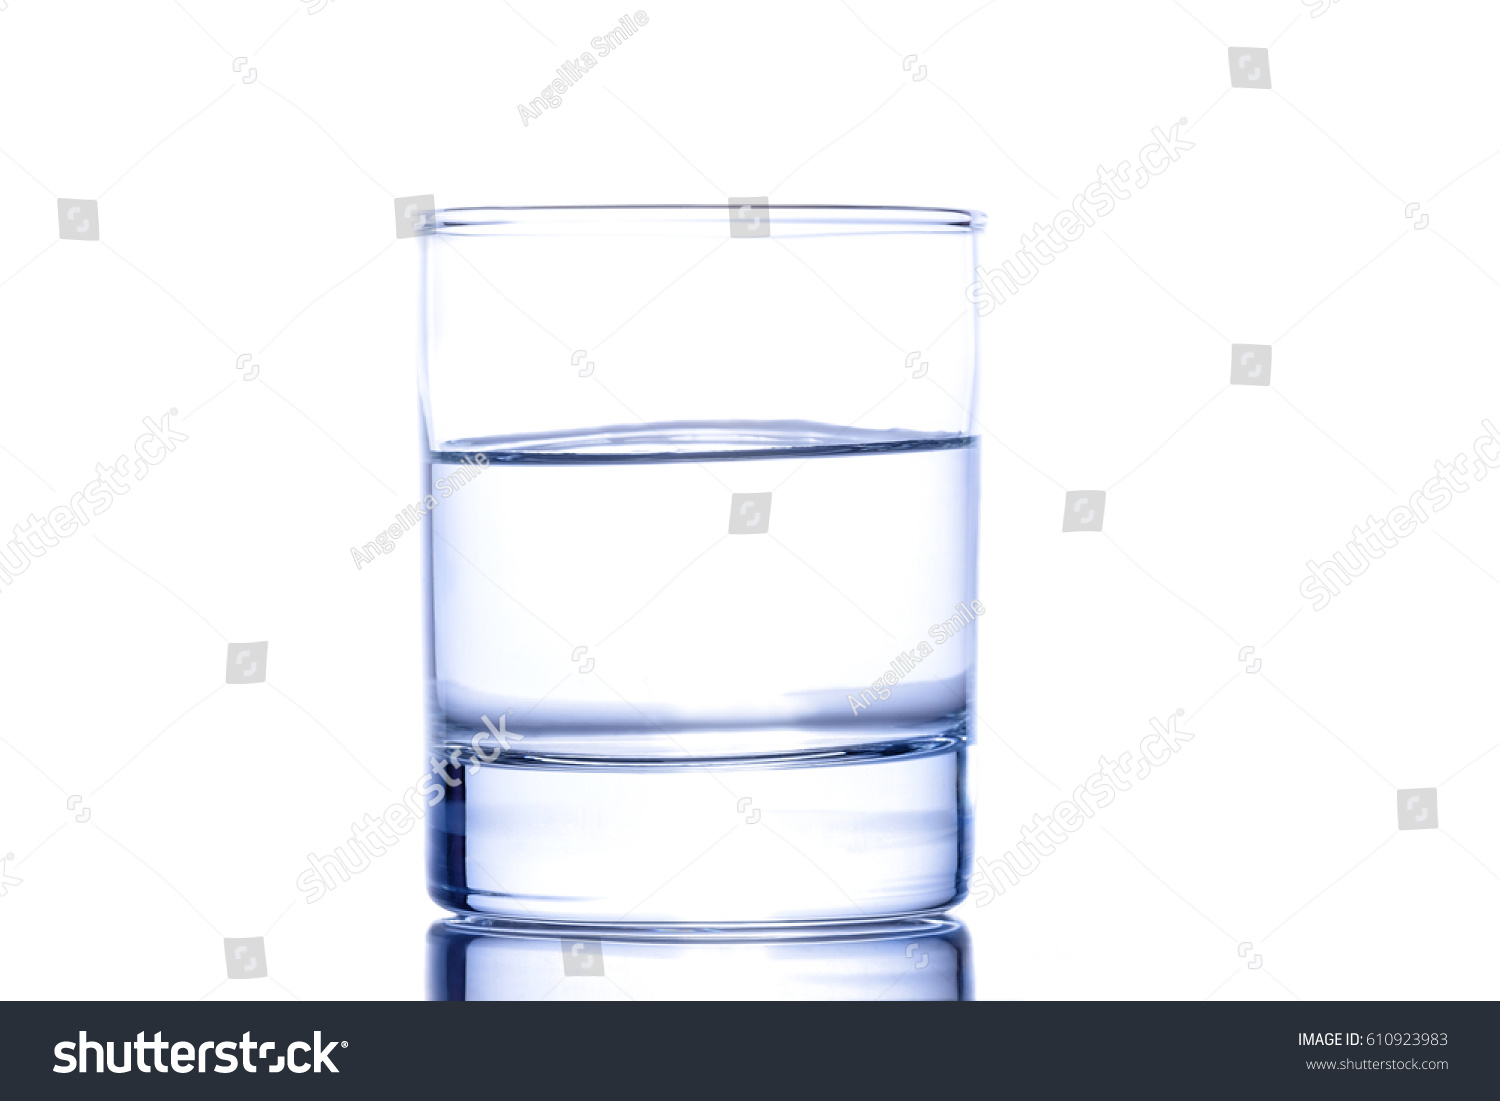 Half a glass of blue water on a white background #610923983